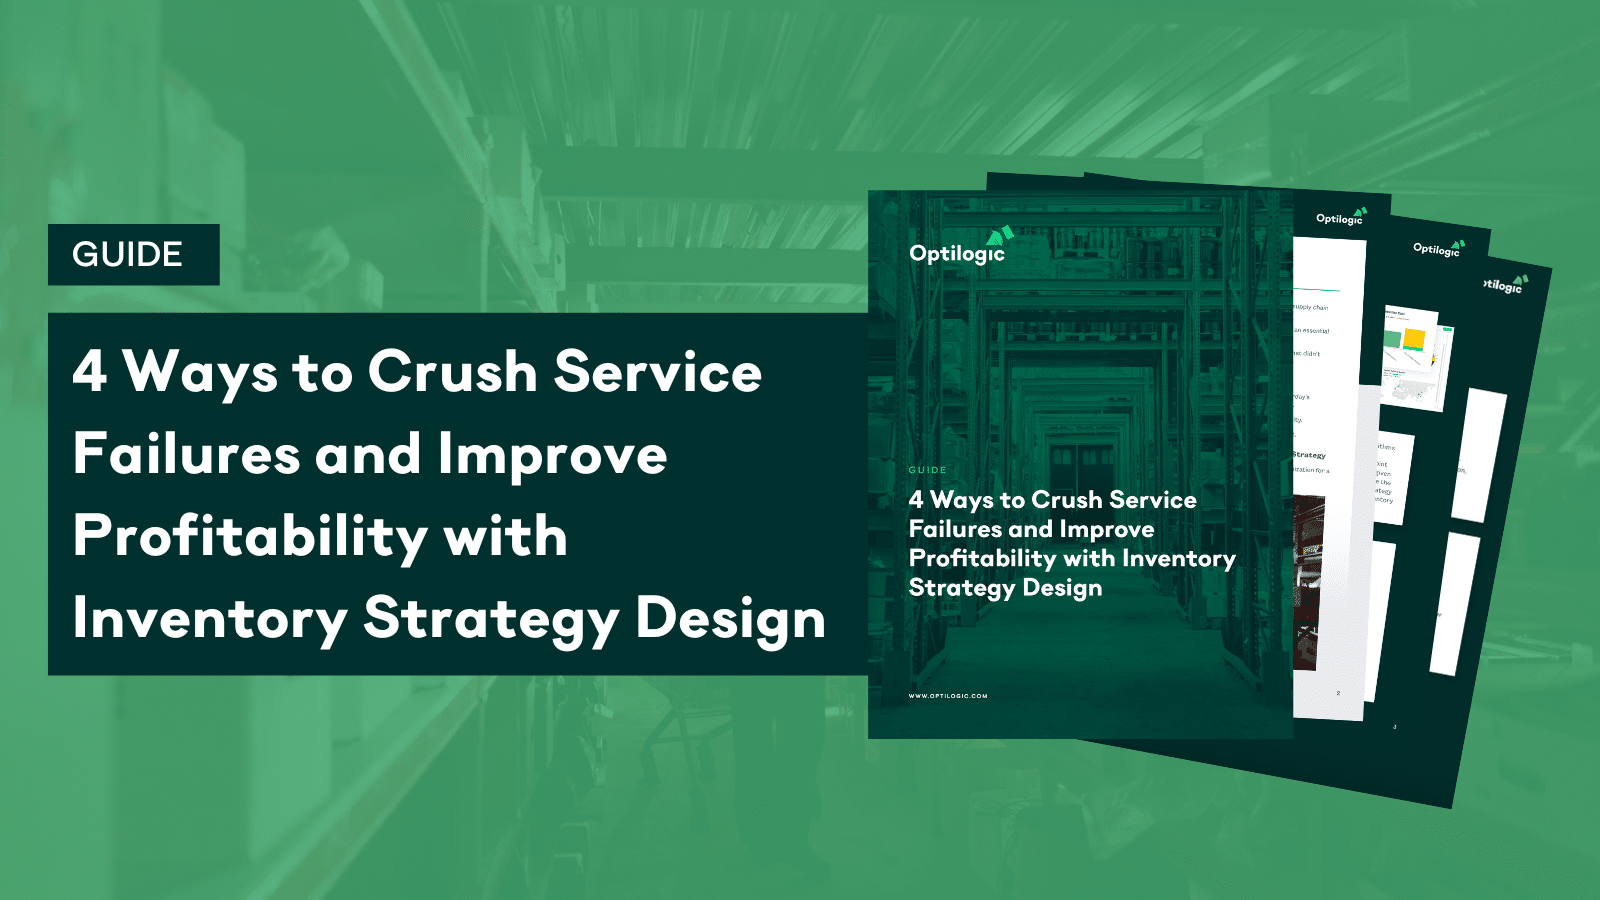 4 Ways to Crush Service Failures and Improve Profitability with Inventory Strategy Design CTA